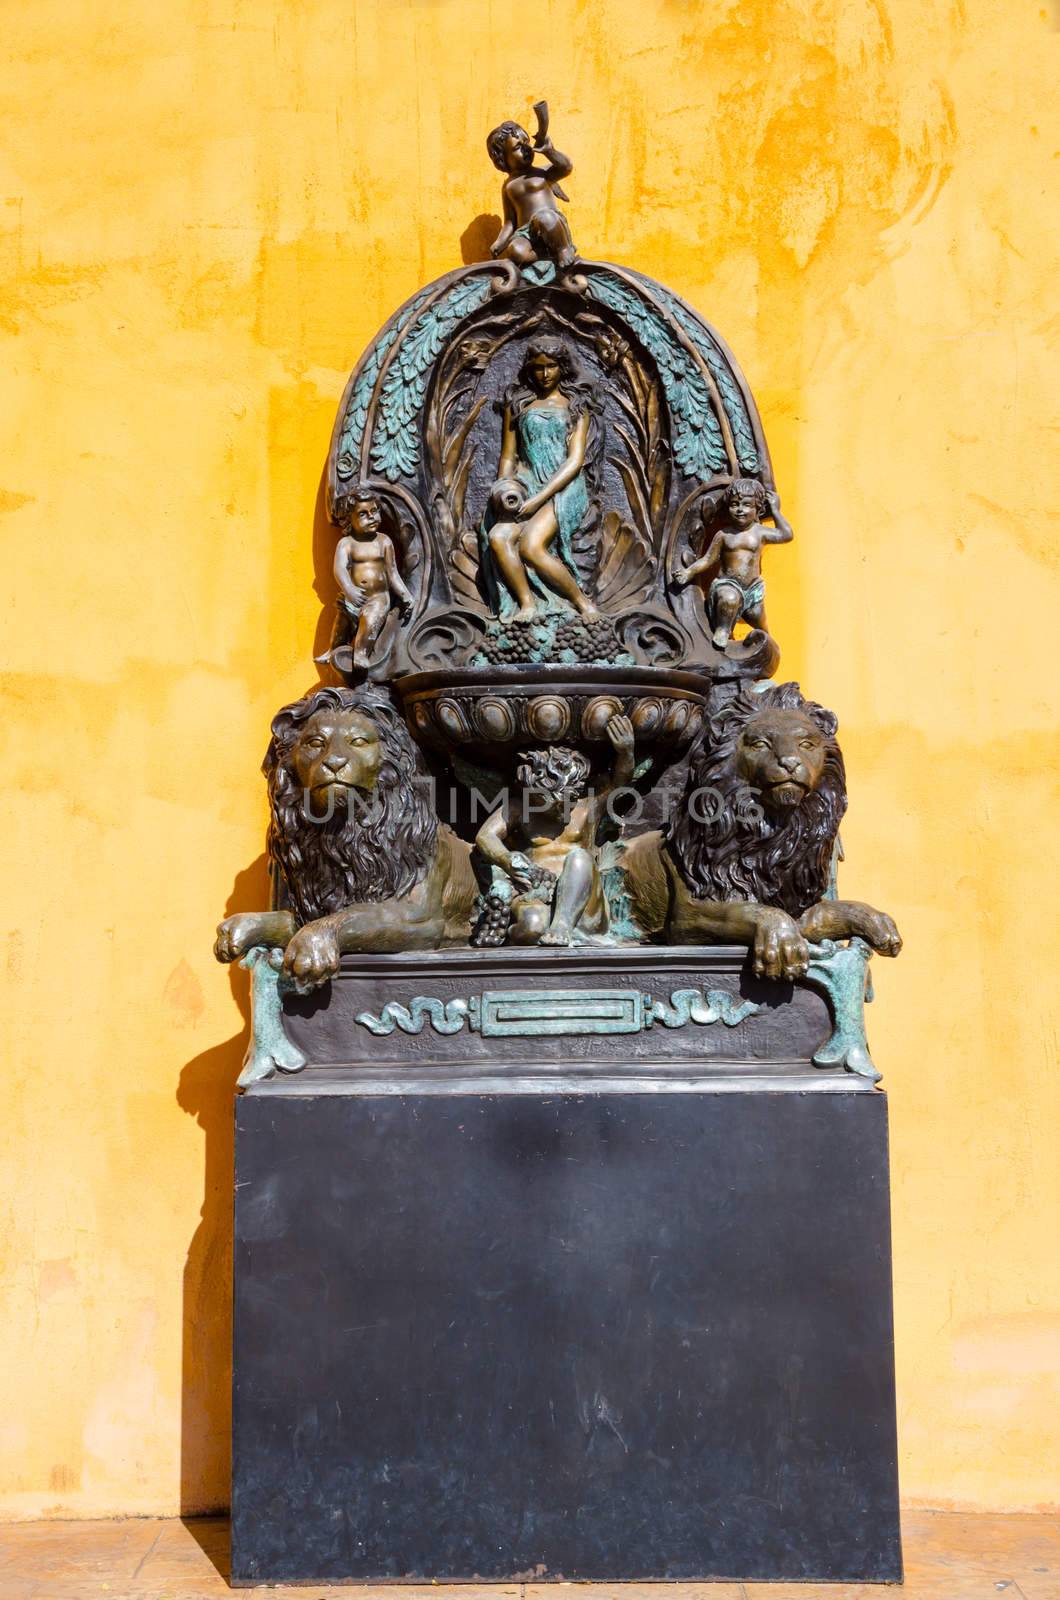 Lion and woman Statue on orange backgrounds,Thailand